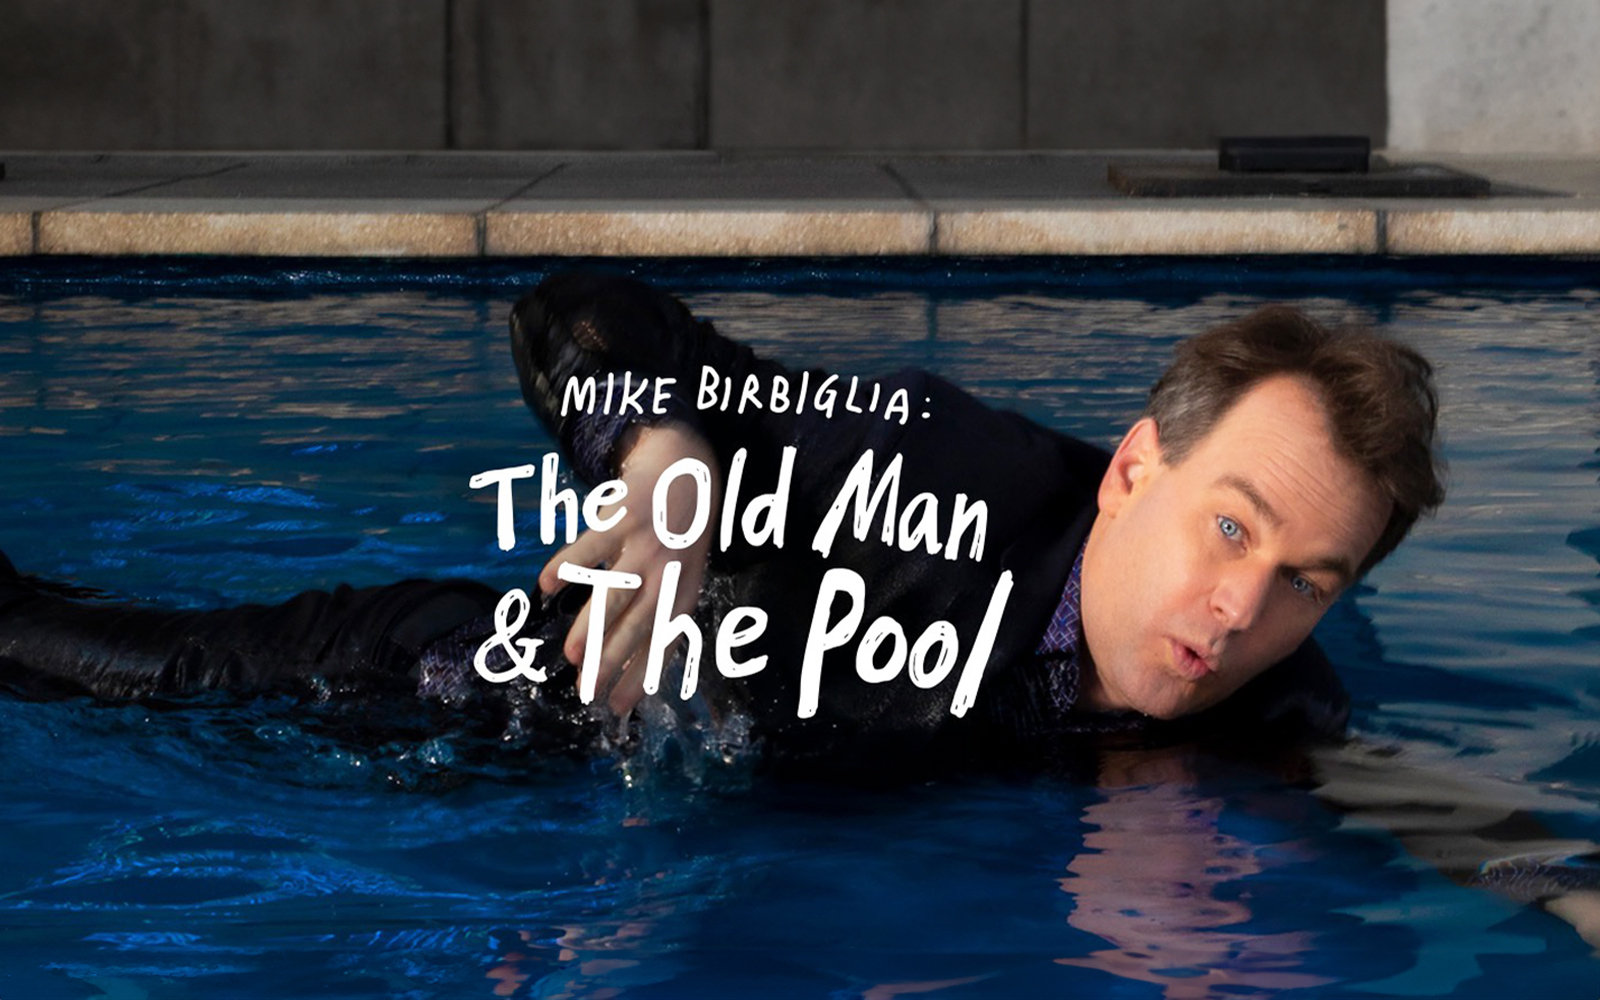 Image of The Old Man & the Pool